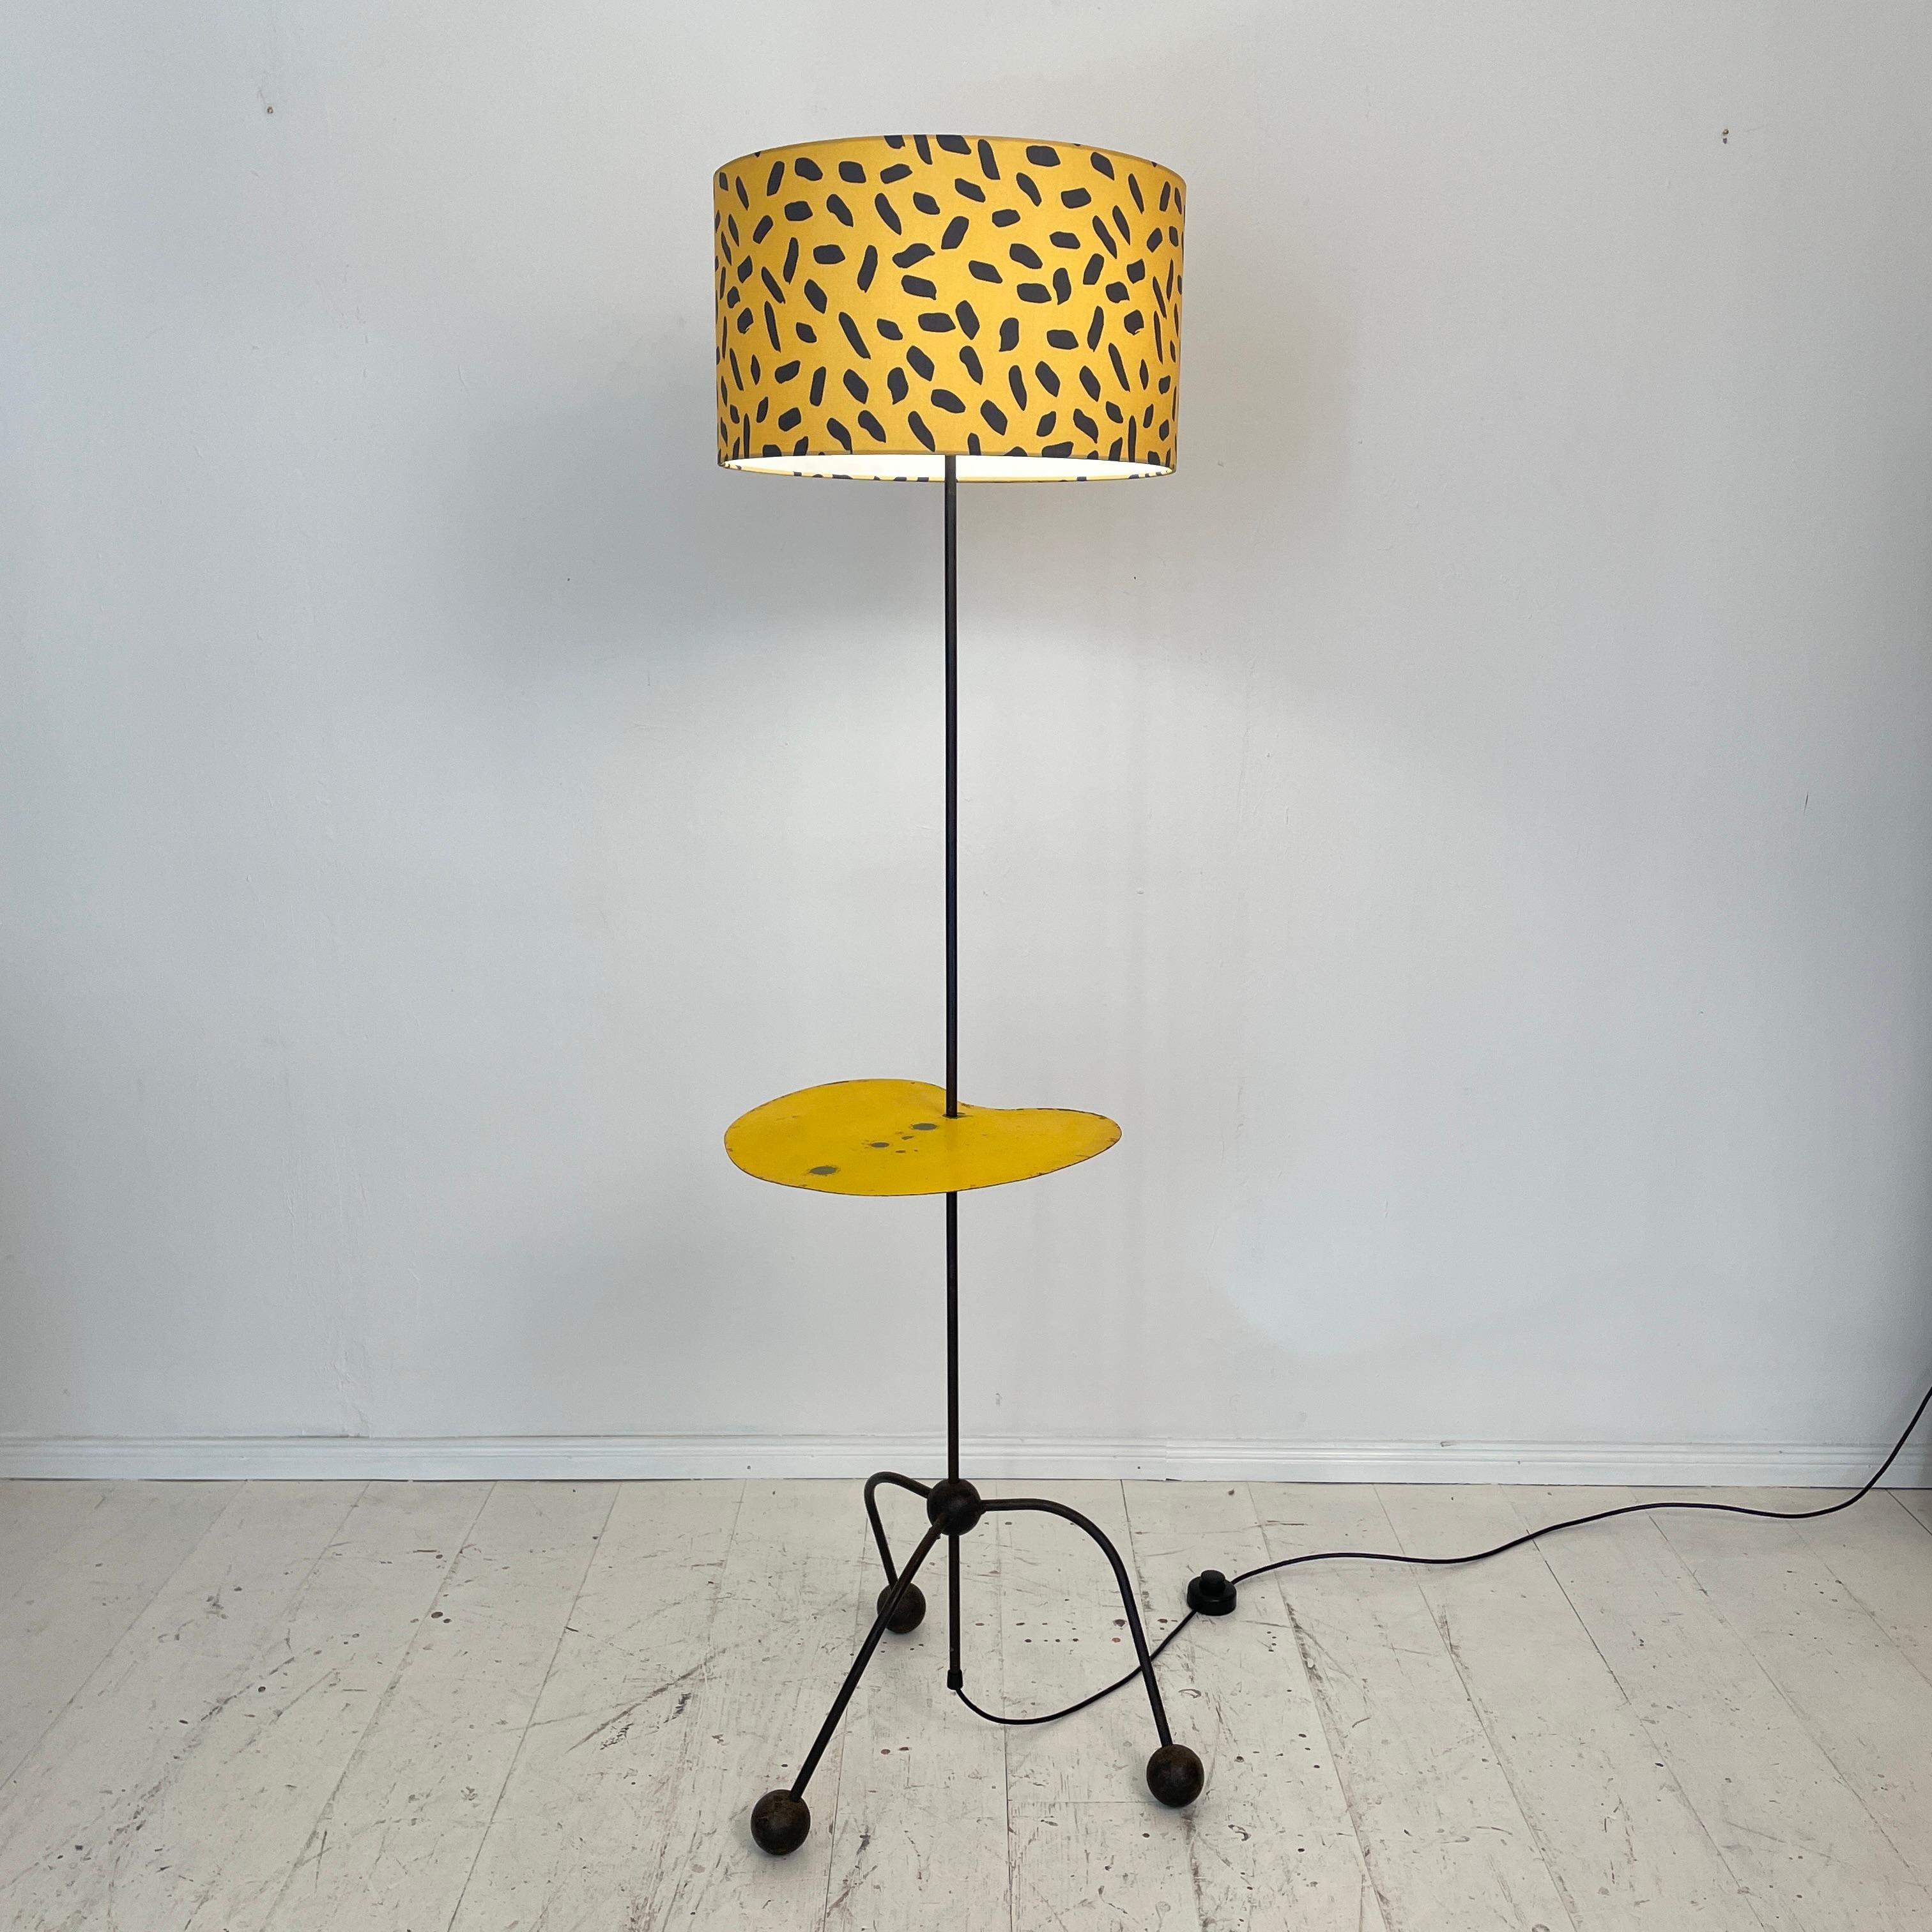 Mid-20th Century Mid-Century French Floor Lamp Made of Black Metal with Yellow Fabric Shade, 1950 For Sale